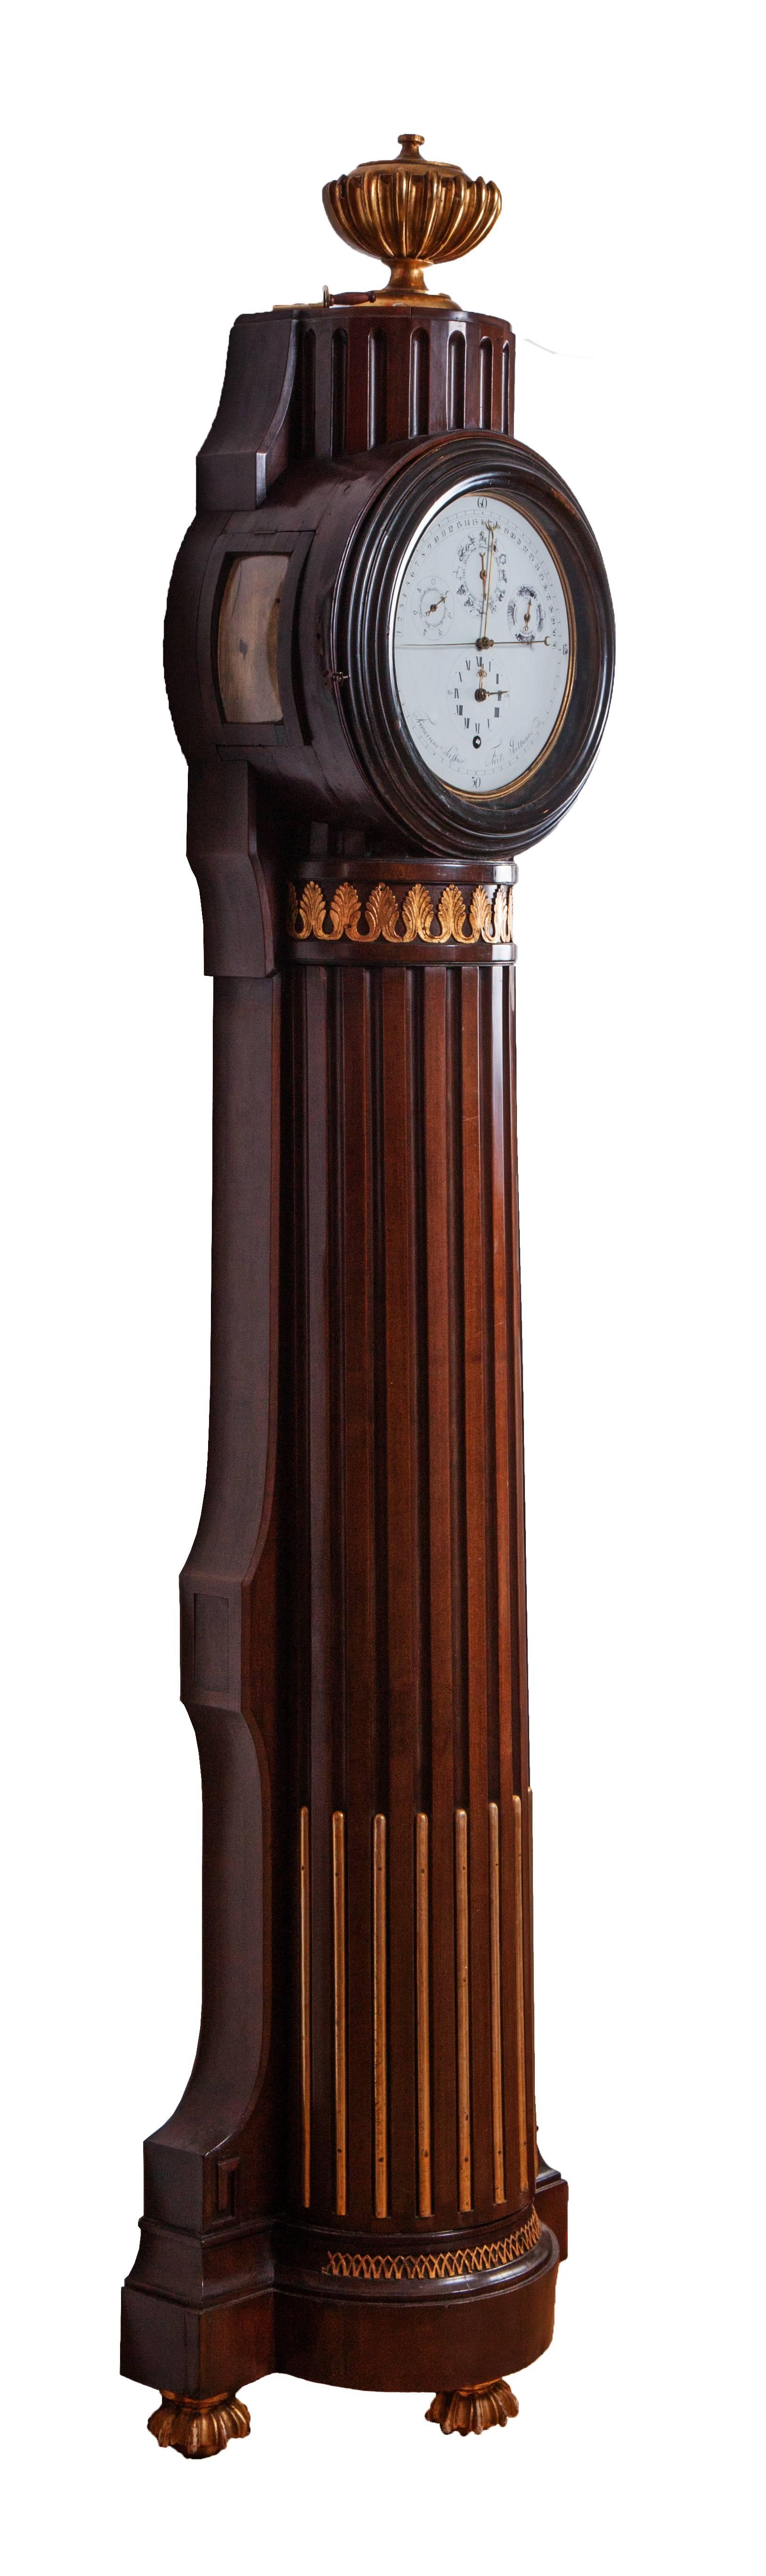 Neoclassical Classicistical Longcase Clock by Seiffner, Budapest, circa 1795 For Sale